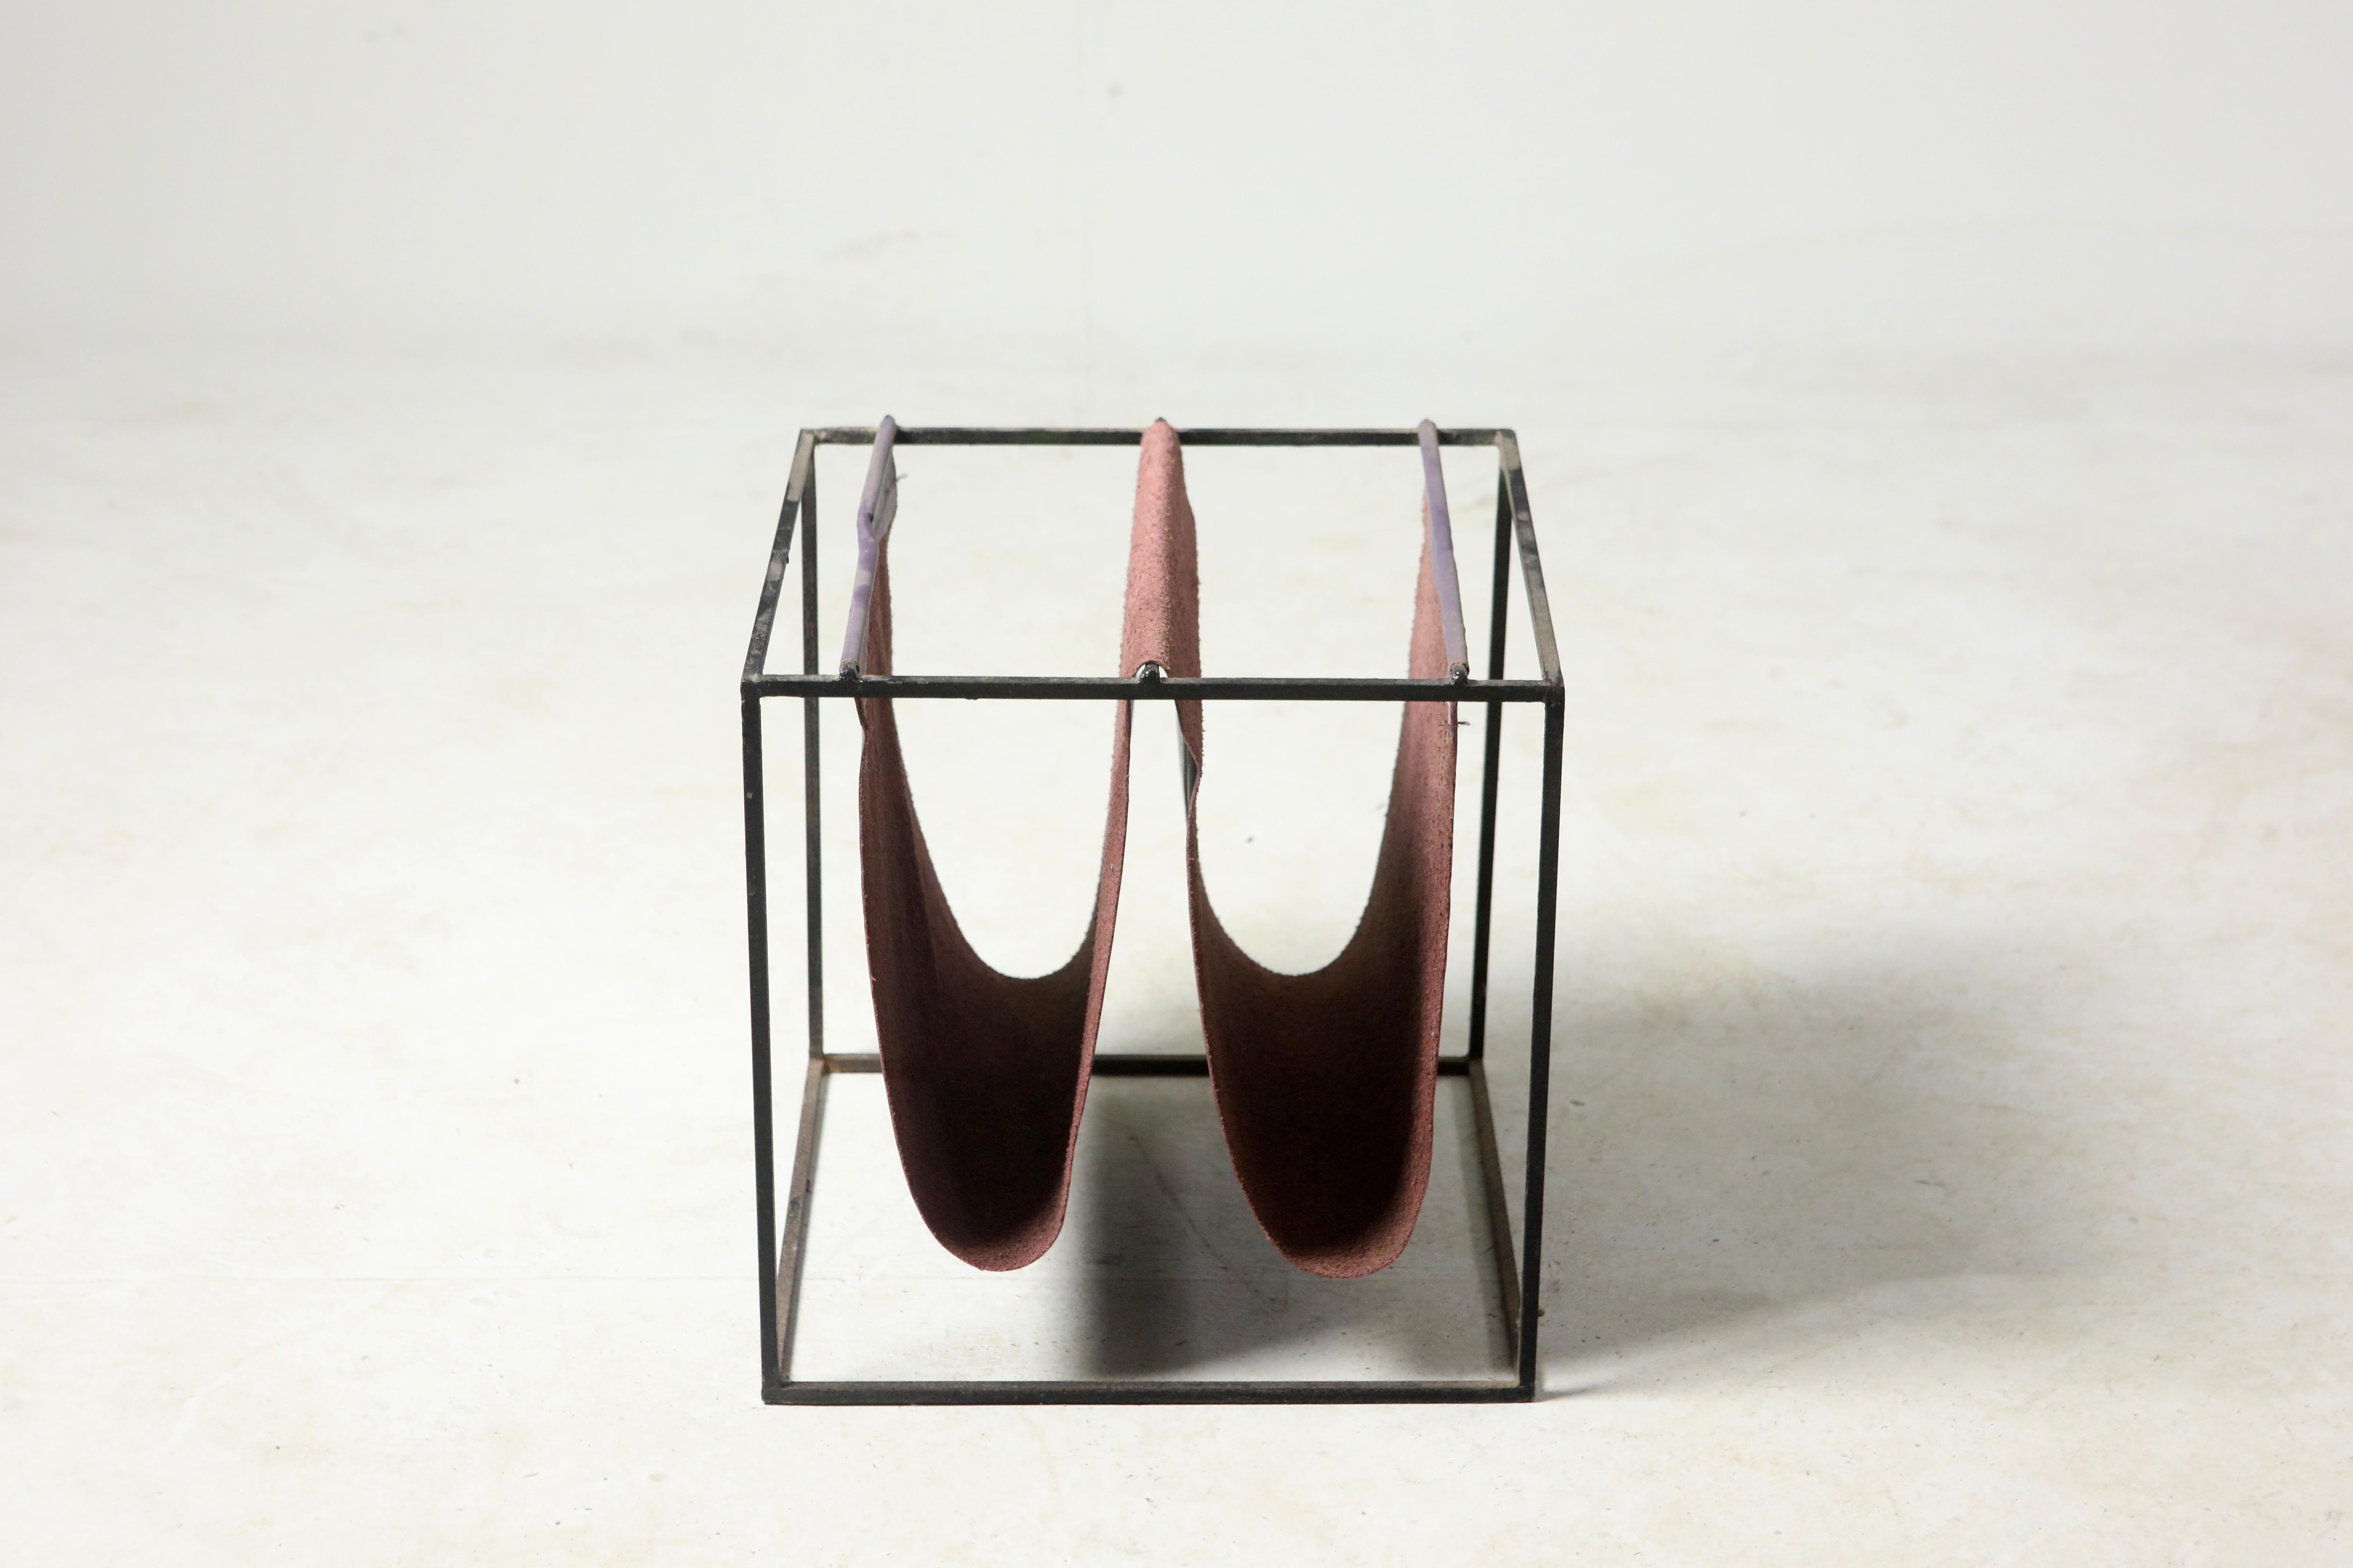 Mid-Century Modern leather magazine rack or stand by Jorge Zalszupin, Brazil 1960s.

This magazine rack is a 1960s creation by the Brazilian designer Jorge Zalszupin. Consisting of a light structure in black painted iron, this piece is completed